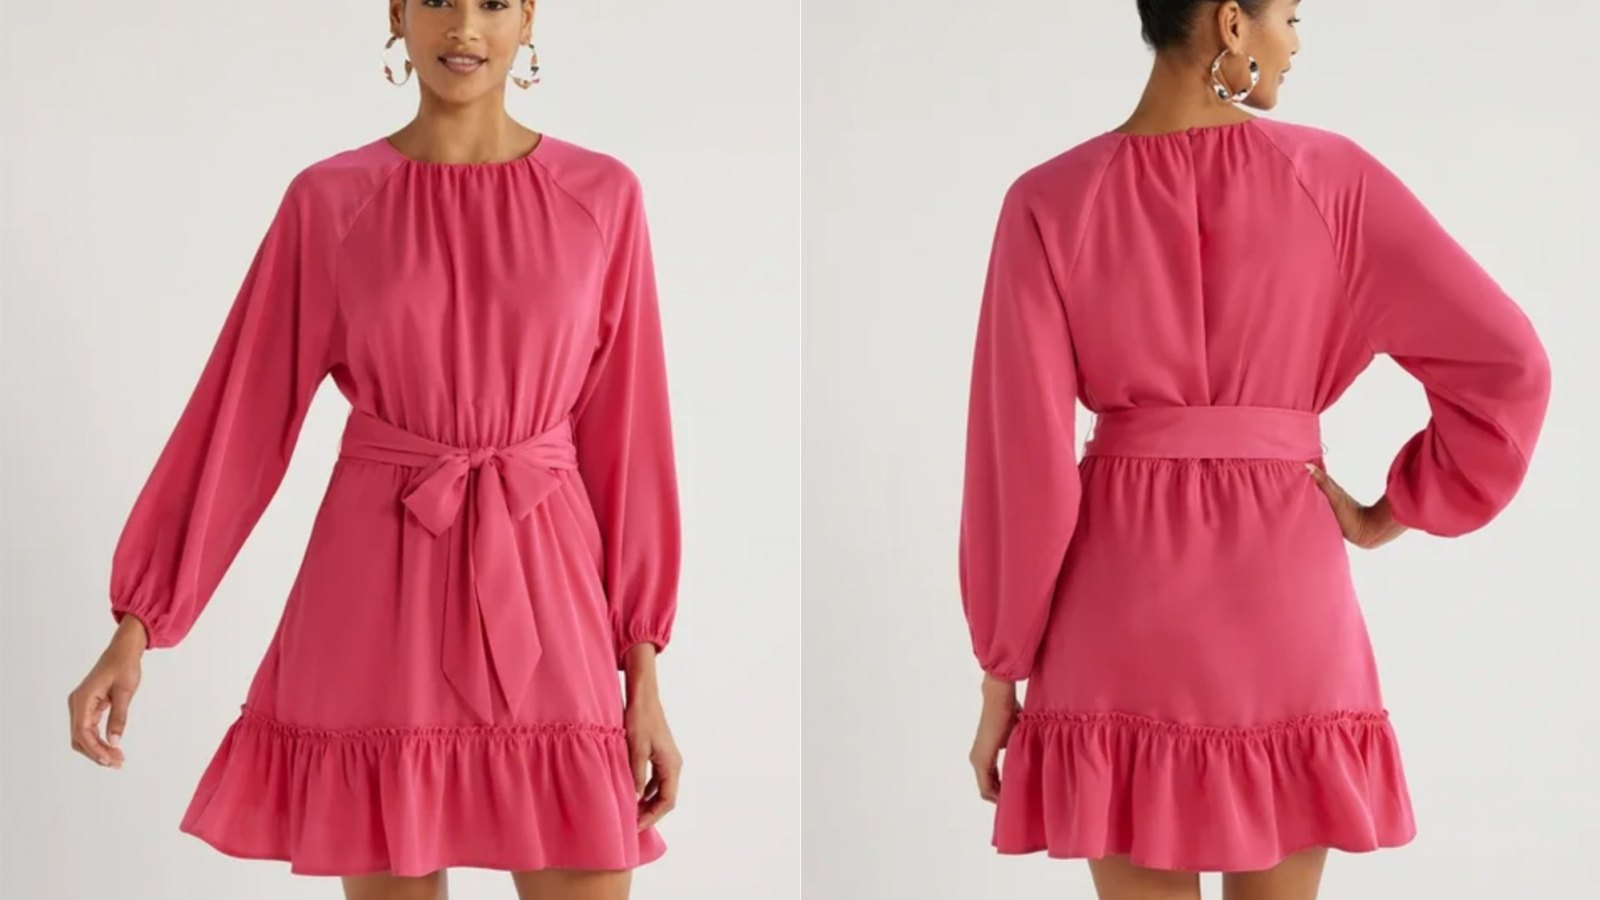 This 'Gorgeous' Walmart Mini Dress Is Perfect for Spring